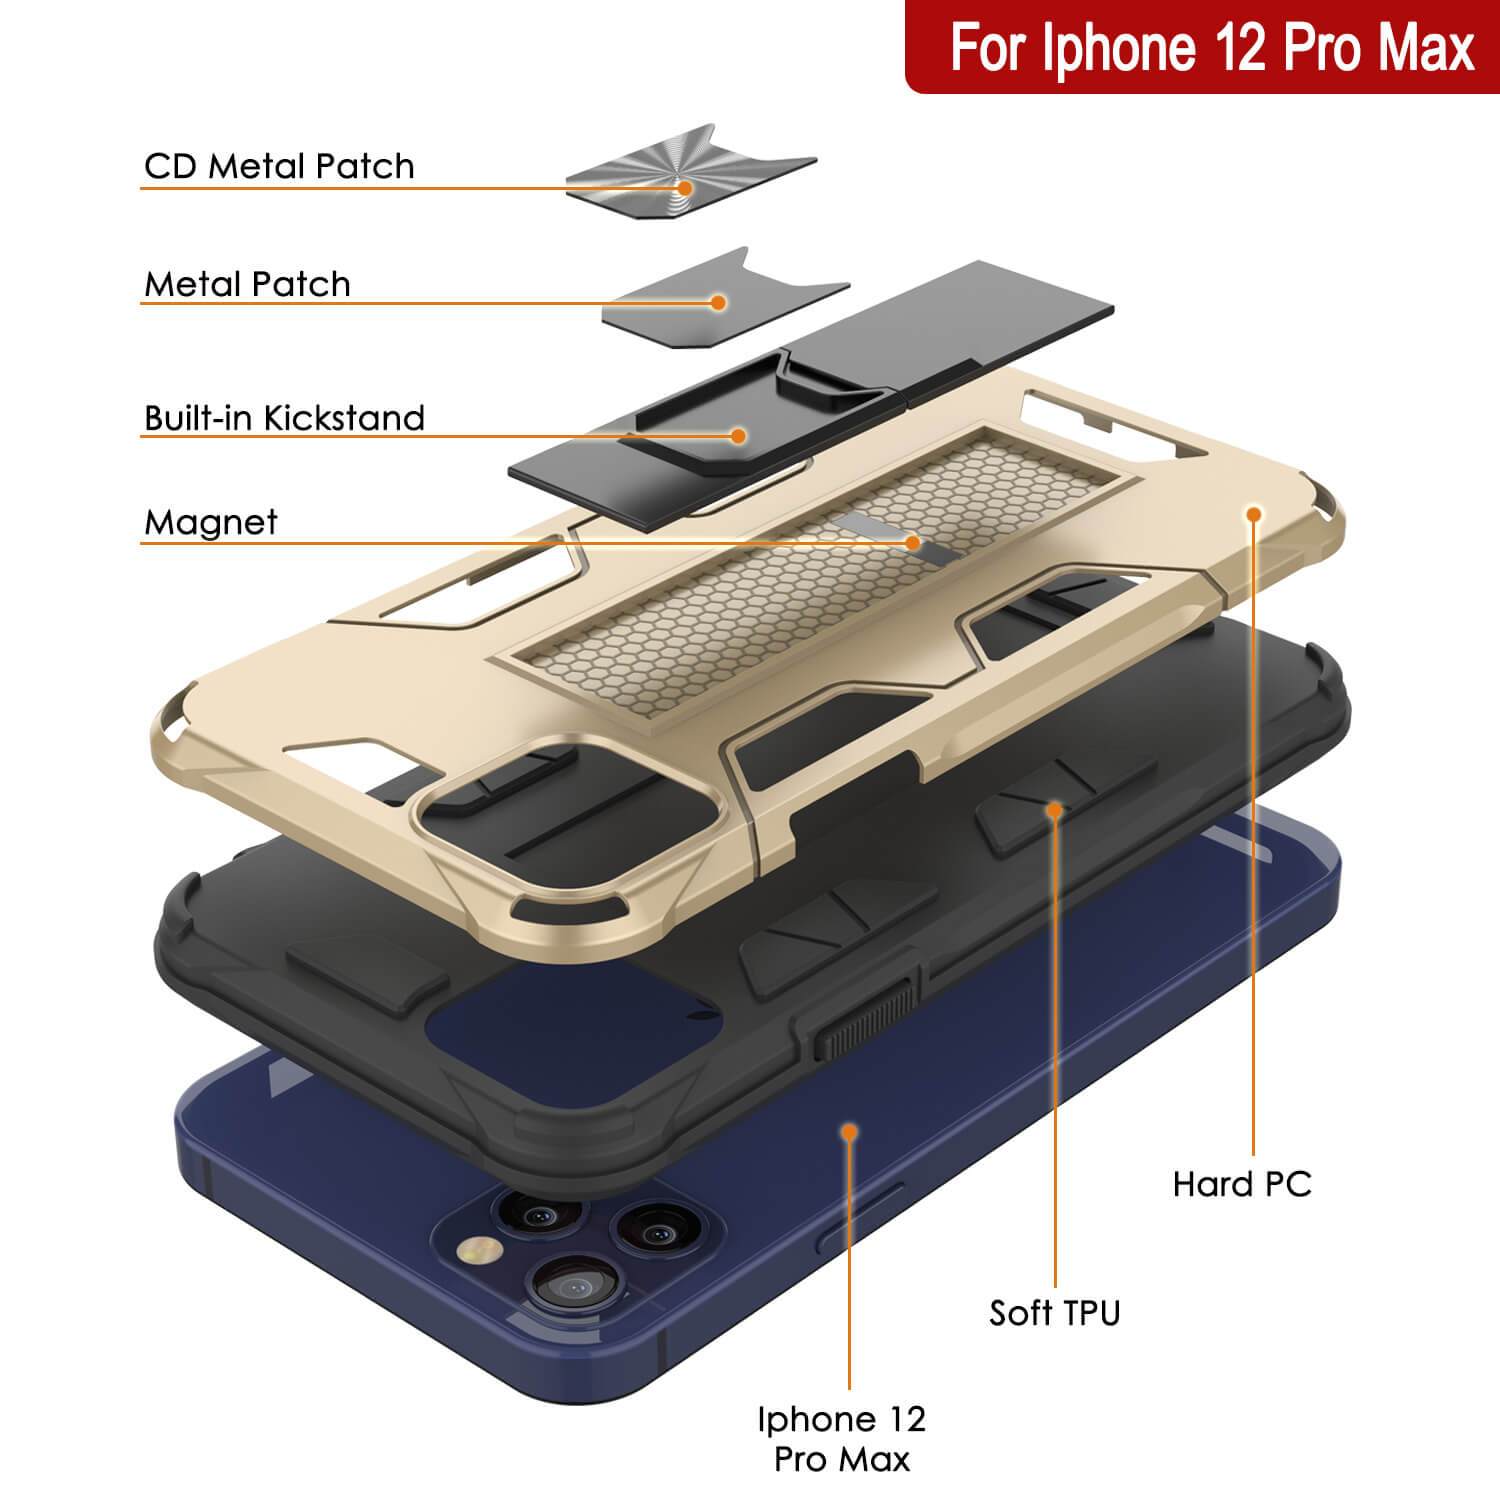 Punkcase iPhone 12 Pro Max Case [ArmorShield Series] Military Style Protective Dual Layer Case Gold